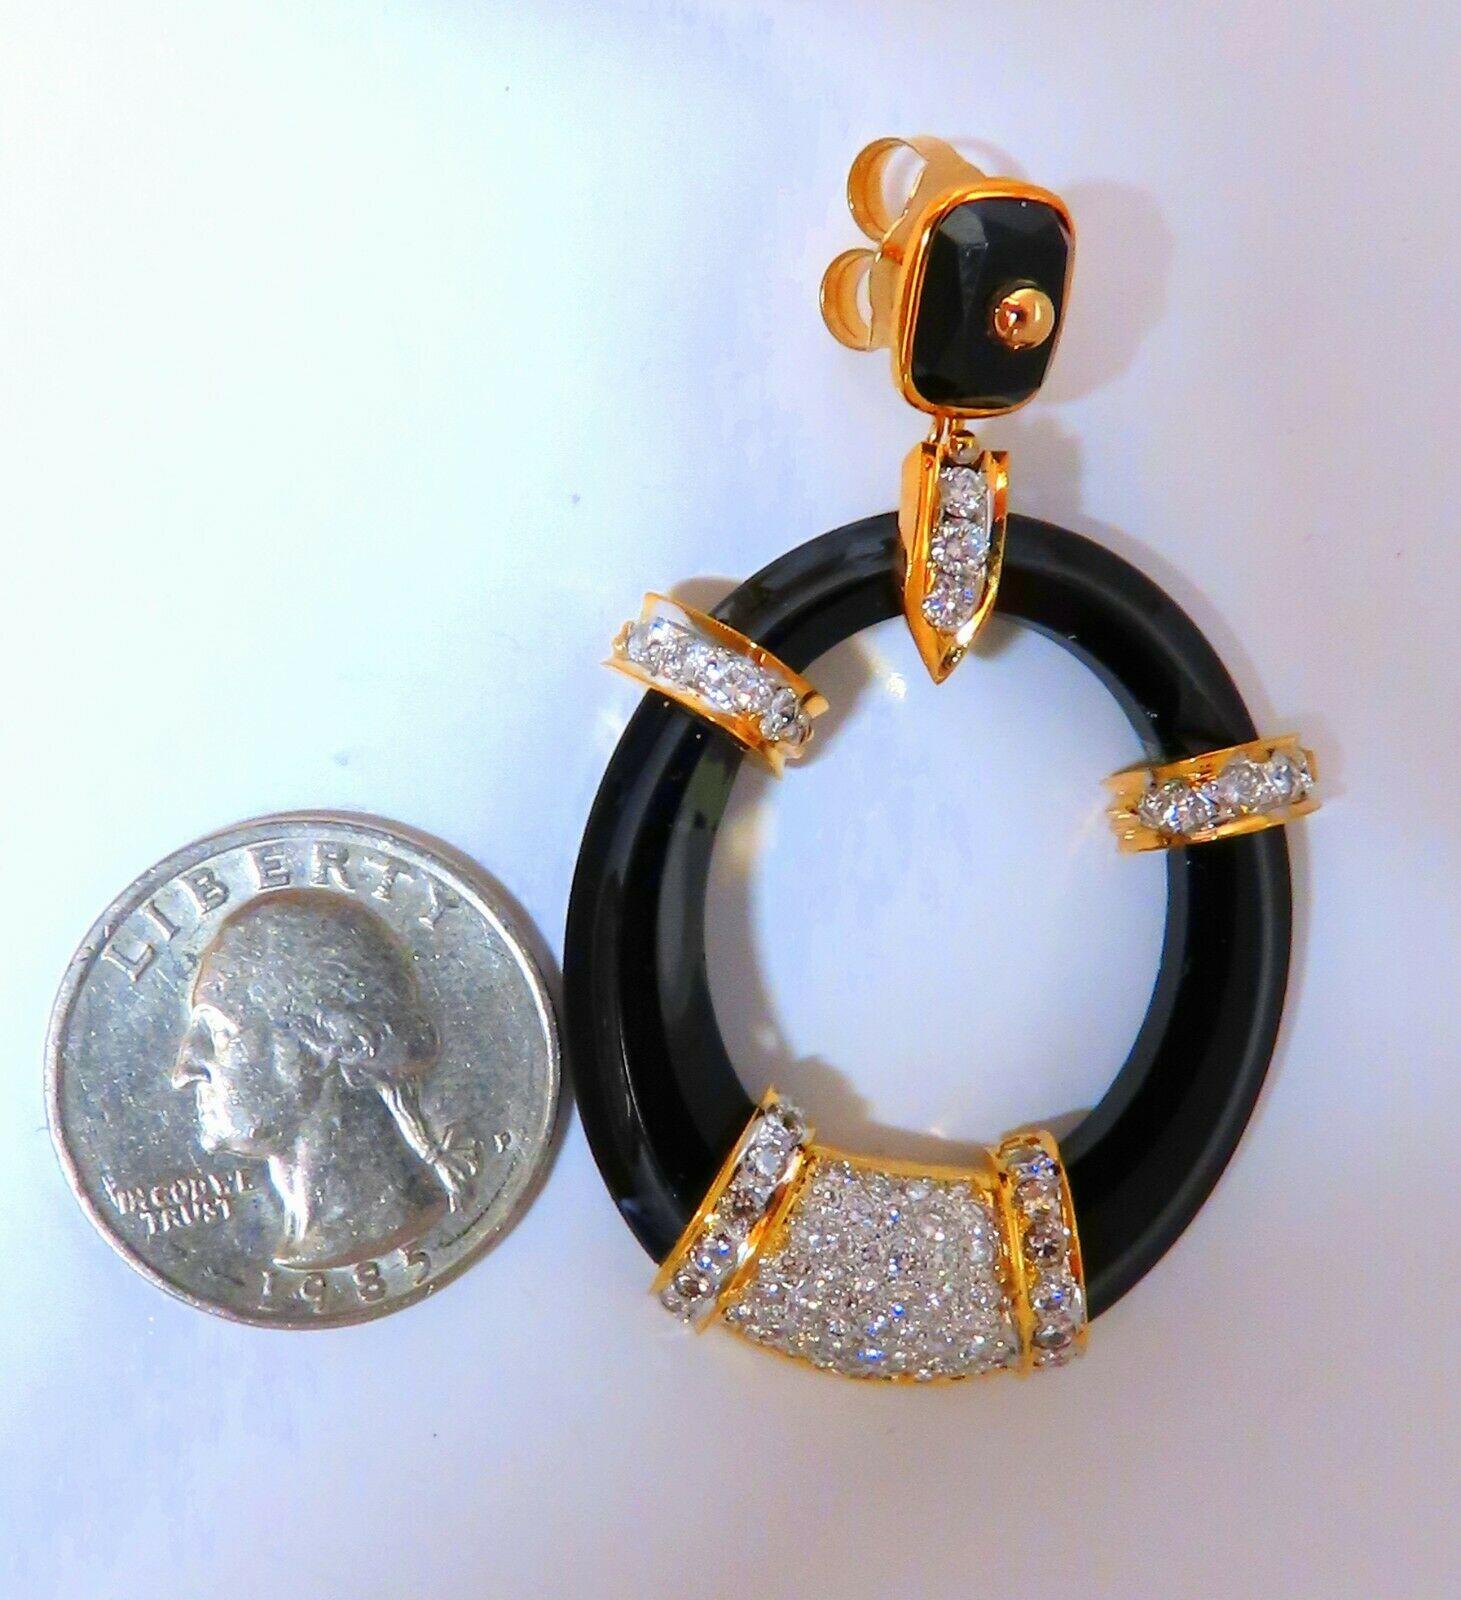 Retro Onyx Diamond Clip Earrings

Gothic Jet Black Carved Natural Onyx 

3.00ct Natural Round Cut Diamonds

G-color Vs-2 clarity.

14Kt. yellow gold.

28.6 Grams.

2.25 x 1.35 Inch 

Comfortable butterfly pushbacks

$12000 Appraisal will accompany